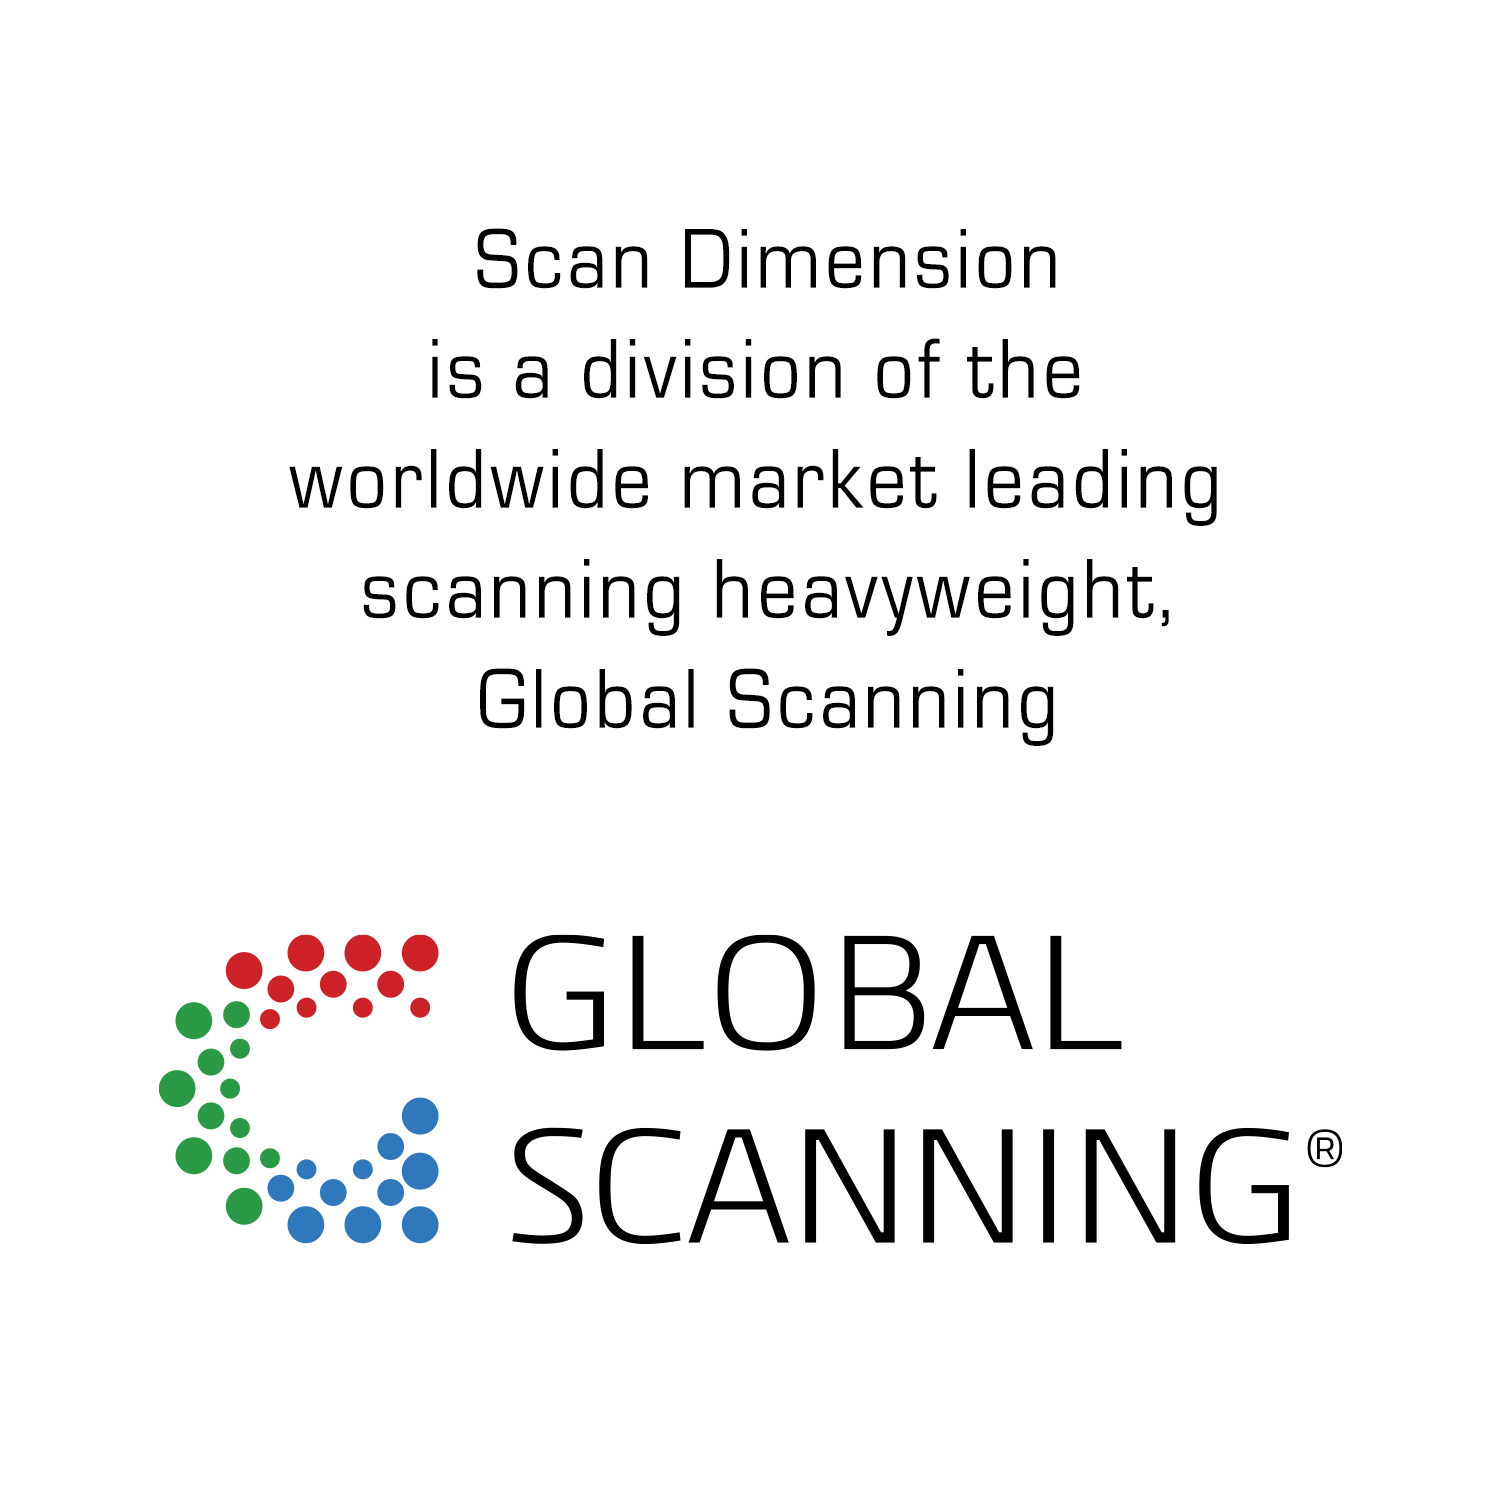 Scan Dimension is a division of Global Scanning 